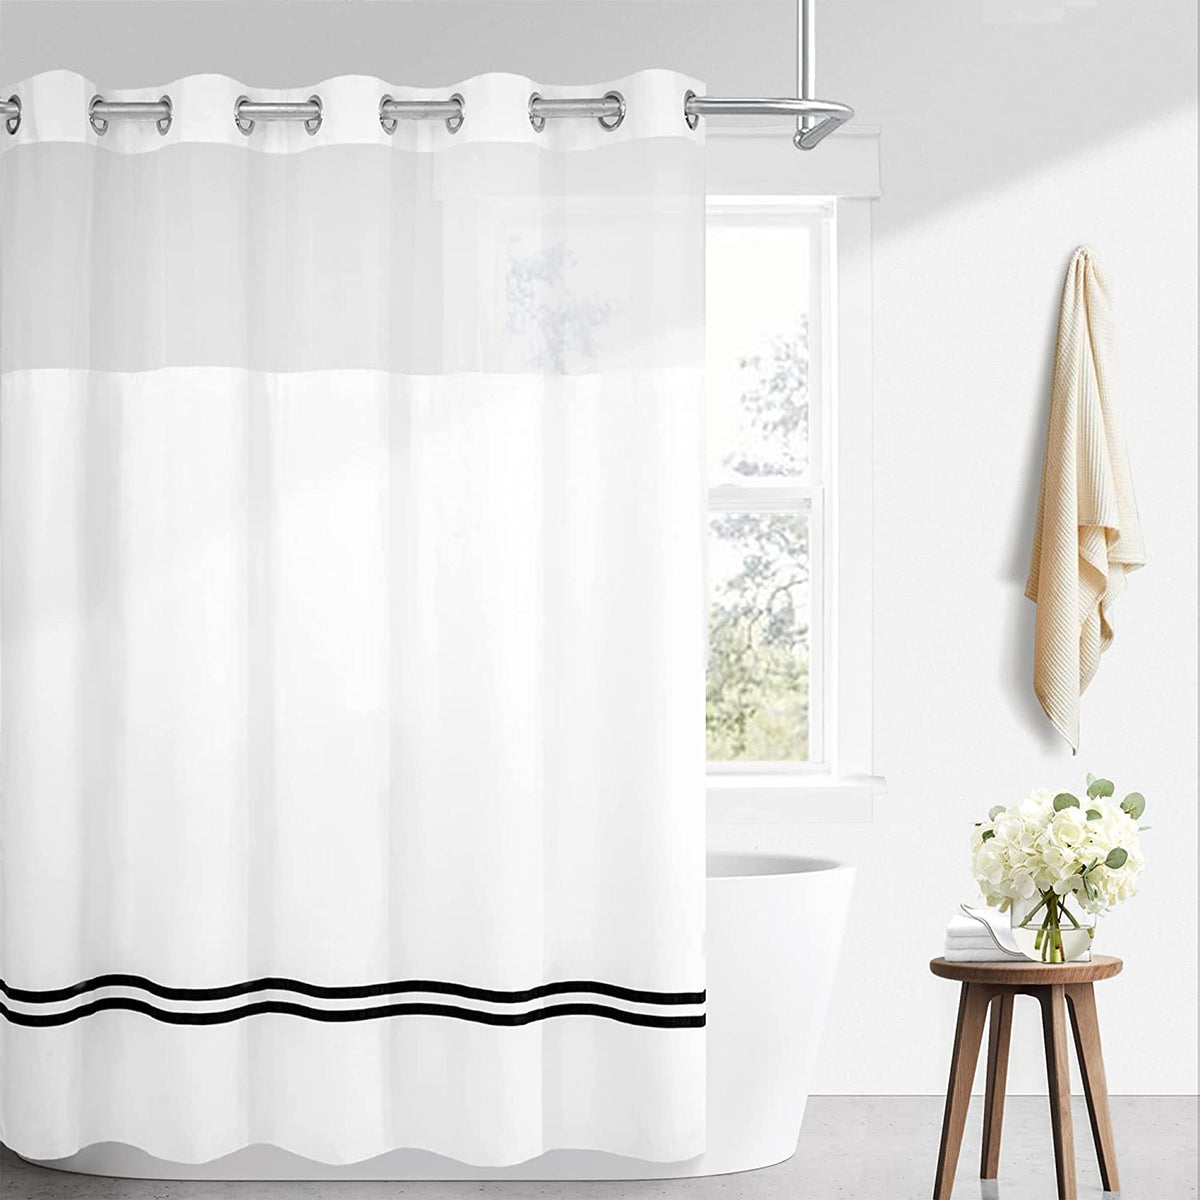 No Hooks Needed with Black Stripe Shower Curtain & Liner – River Dream